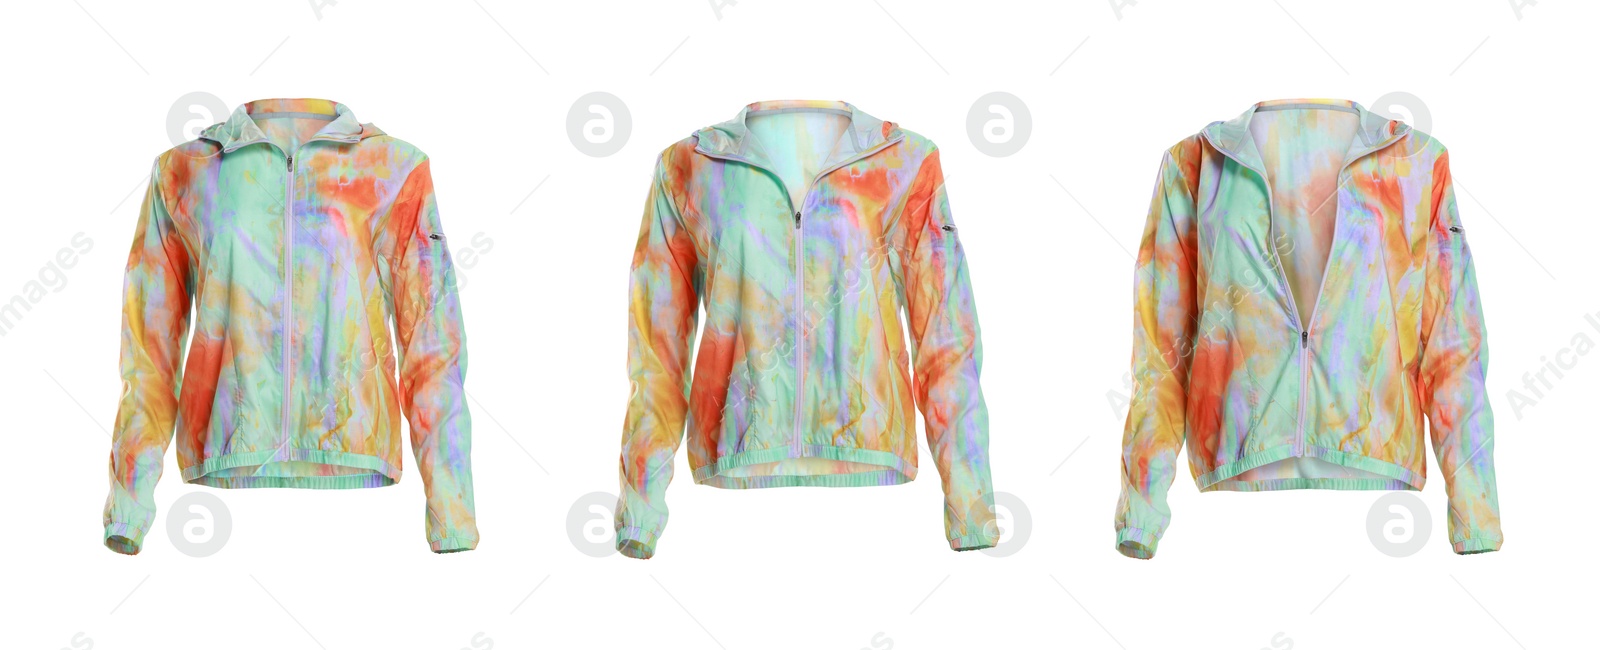 Image of Comfortable sportswear. Collage with bright sports windbreaker on white background